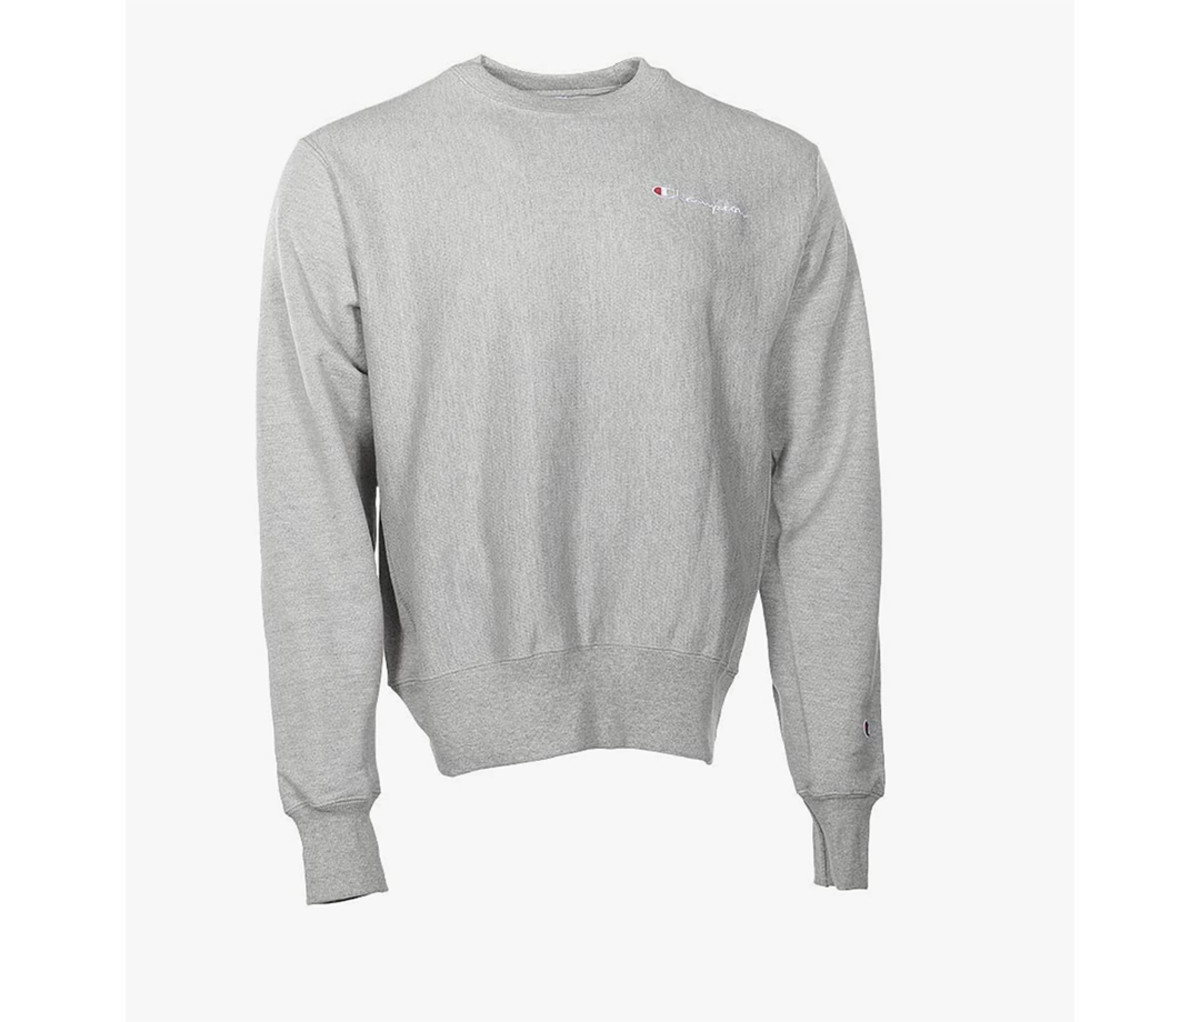 Warmup This Fall With the Champion Crew Sweatshirt - Men's Journal